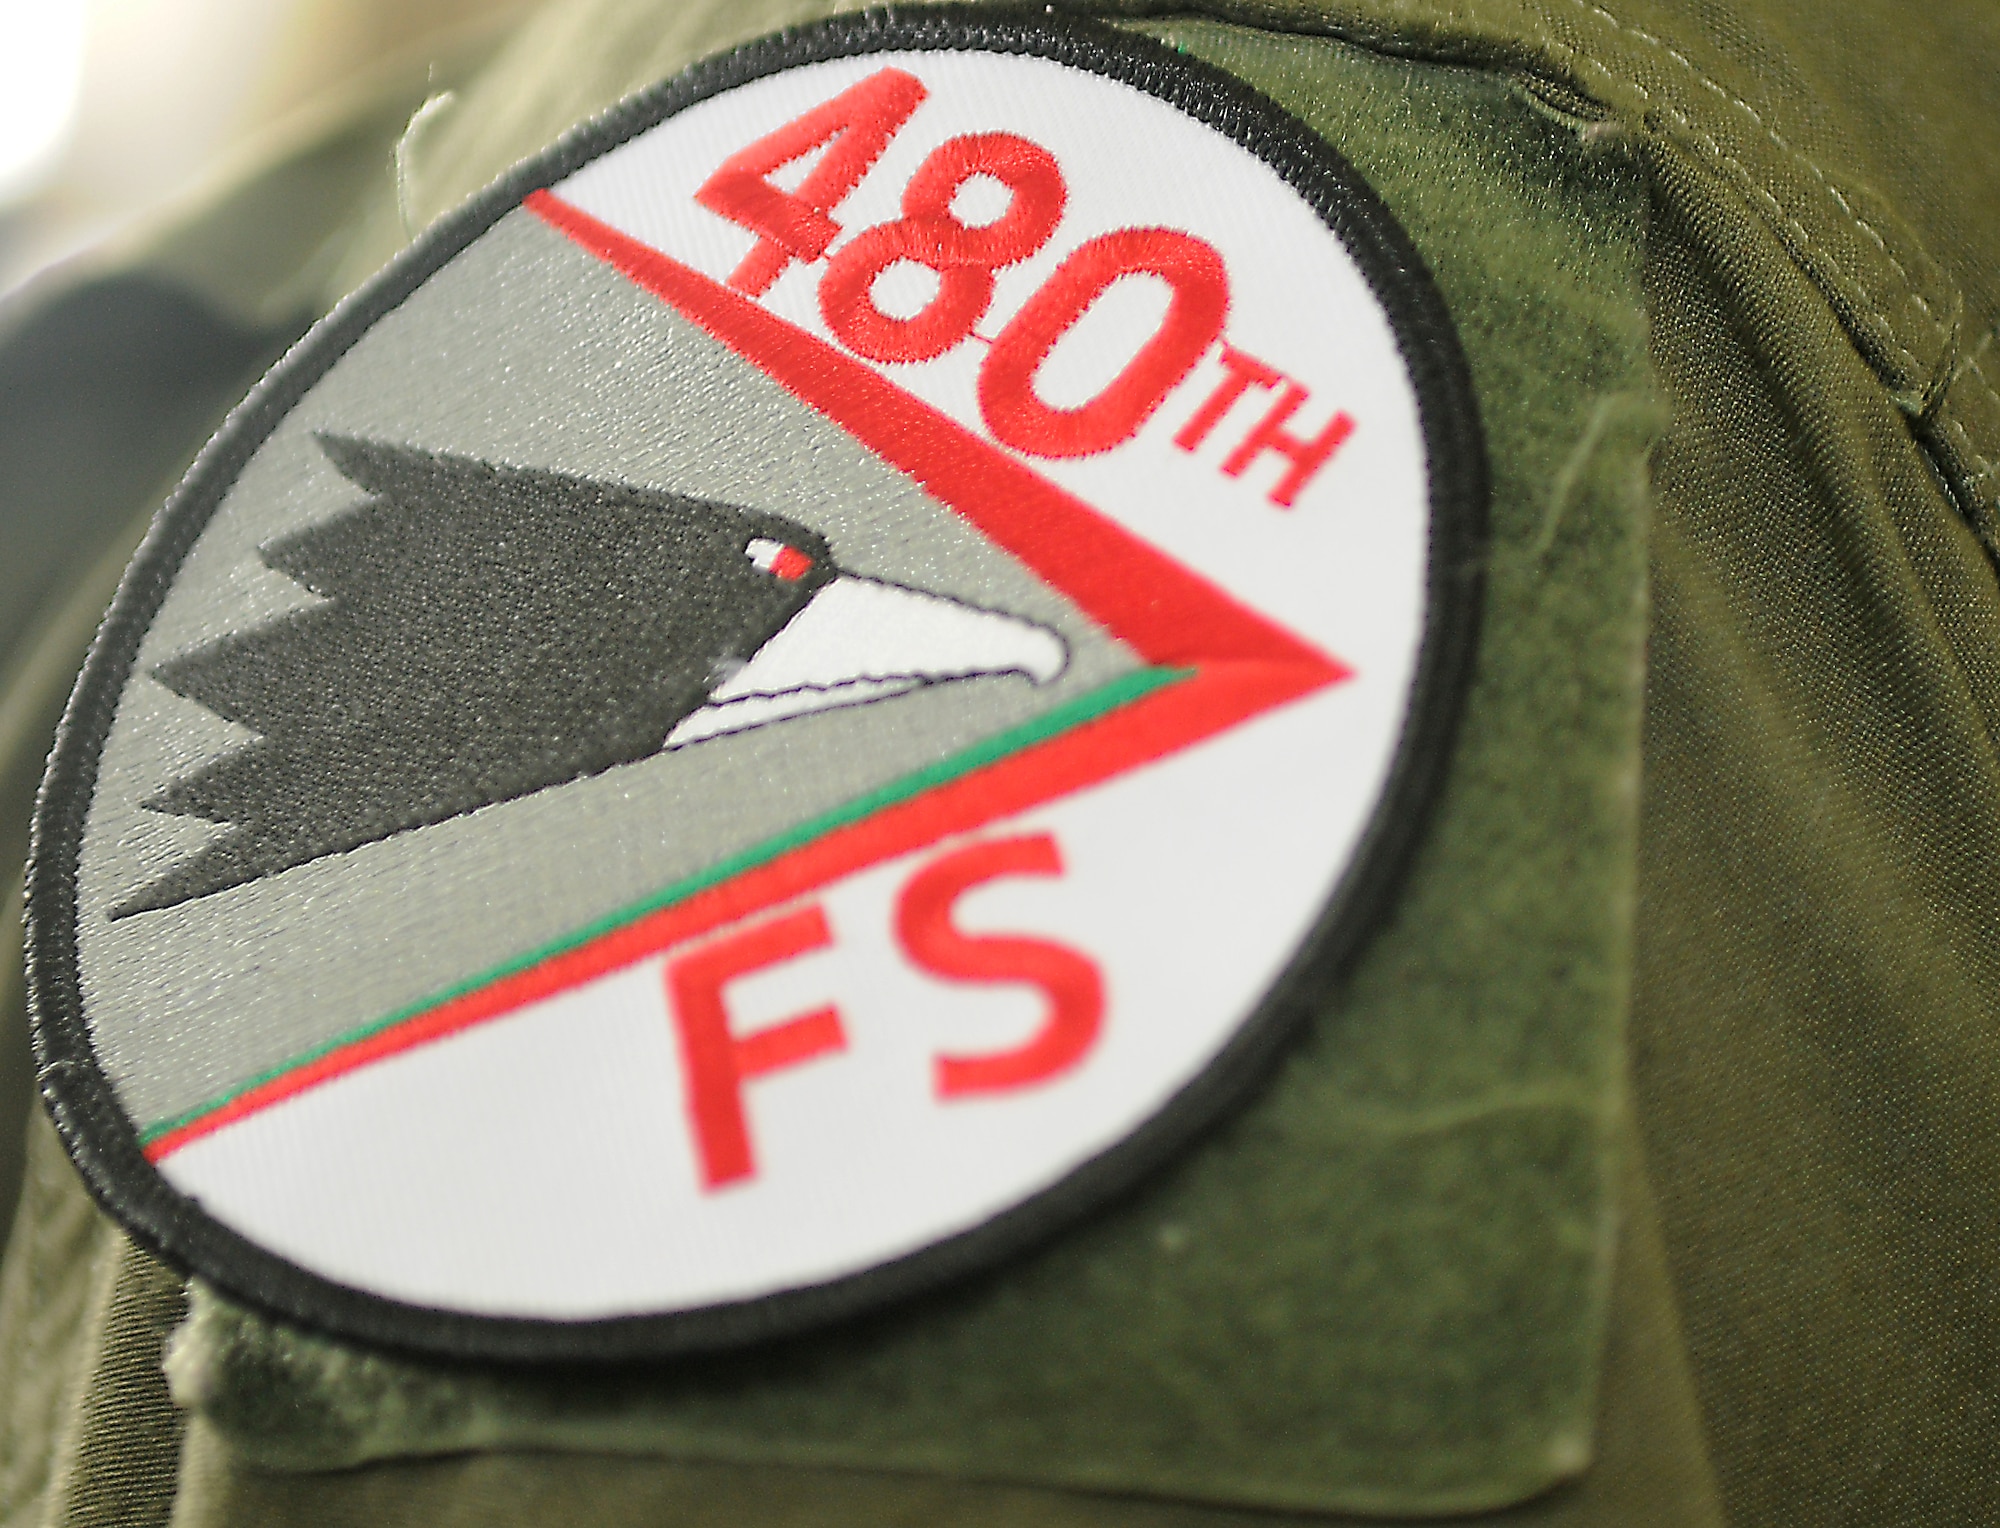 SPANGDAHLEM AIR BASE, Germany--The 480th Fighter Squadron patch is visible on the arm of an F-16 Fighting Falcon pilot during the 480th’s activation ceremony Aug. 13.  During the ceremony all 22nd Fighter Squadron “Stingers” removed their patches and replaced them with new Warhawk patch.  The 480th is Spangdahlem’s newest F-16 Fighting Falcon squadron, and took on the motto “From Escardrille to Warhawks” to signify its geographical ties to the Lafayette Escadrille in France. Prior to America’s entry into World War I, 38 American pilots volunteered to fly for the French Aéronautique militaire in April 1916 and are known as America’s first fighter aircraft aviators.  (U.S. Air Force photo/Staff Sgt. Logan Tuttle)